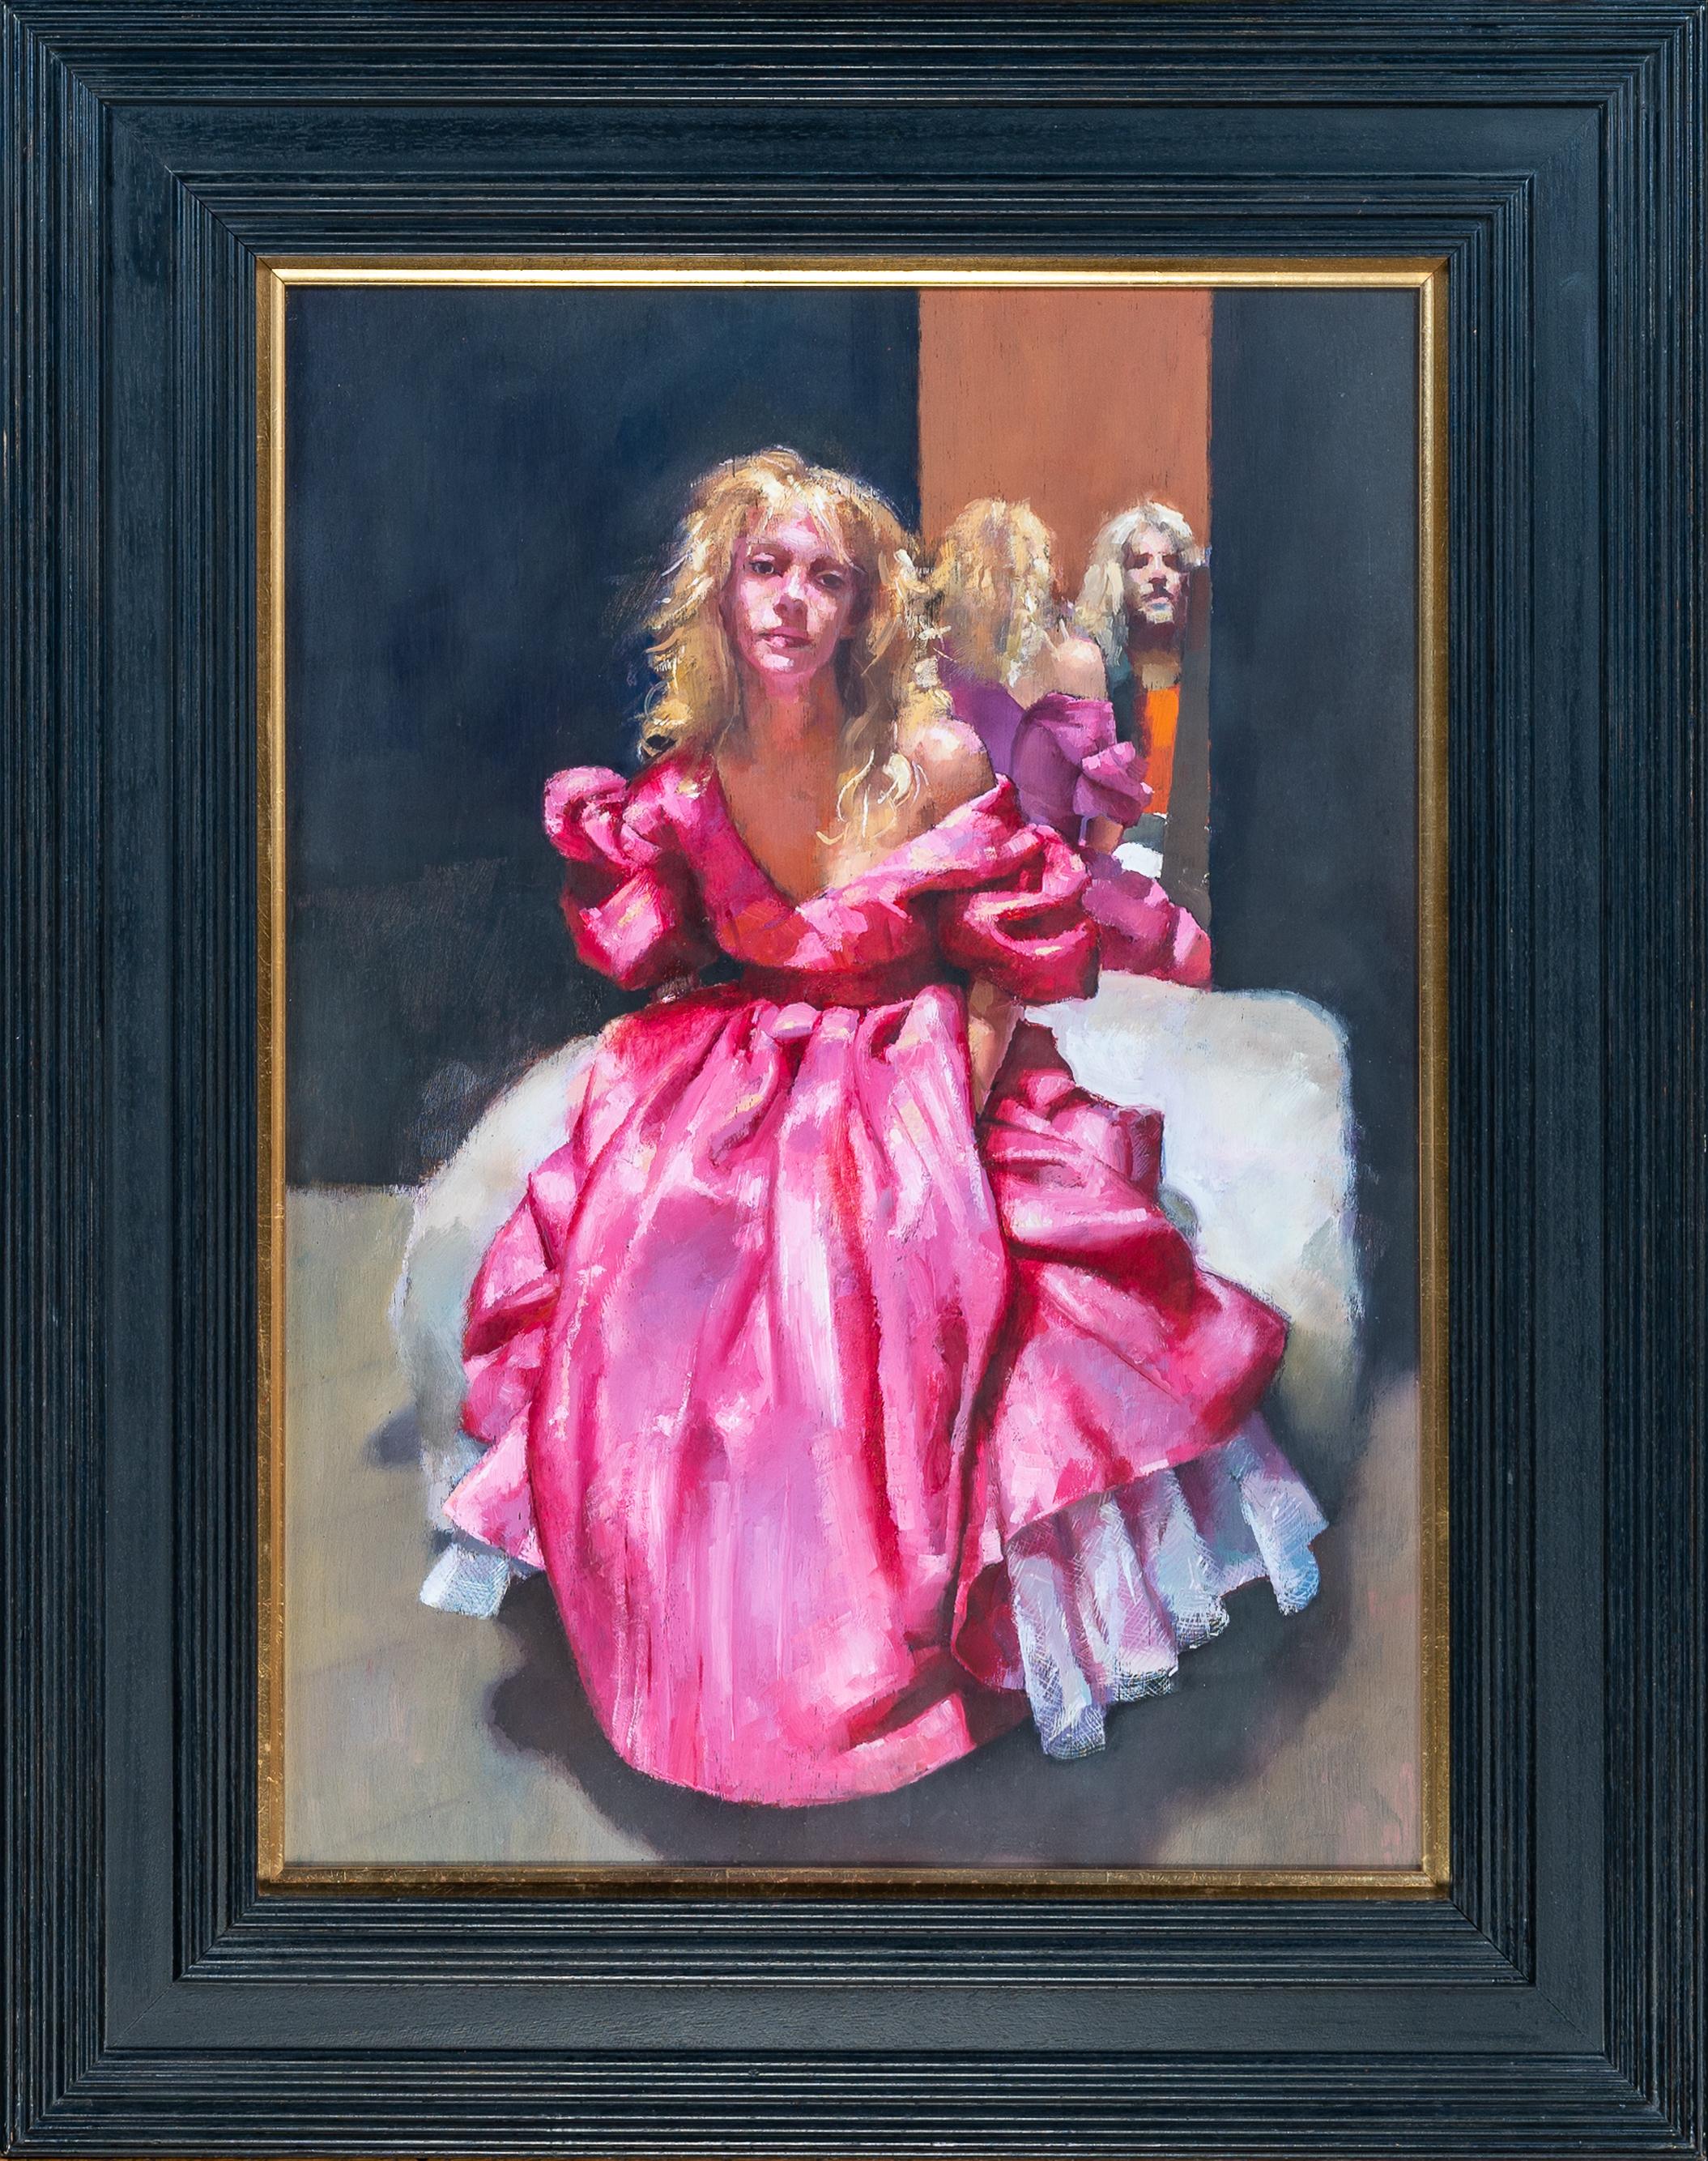 Robert Lenkiewicz  Figurative Painting - 'Painter with Pati' Figurative painting, man & woman wearing a pink ball gown